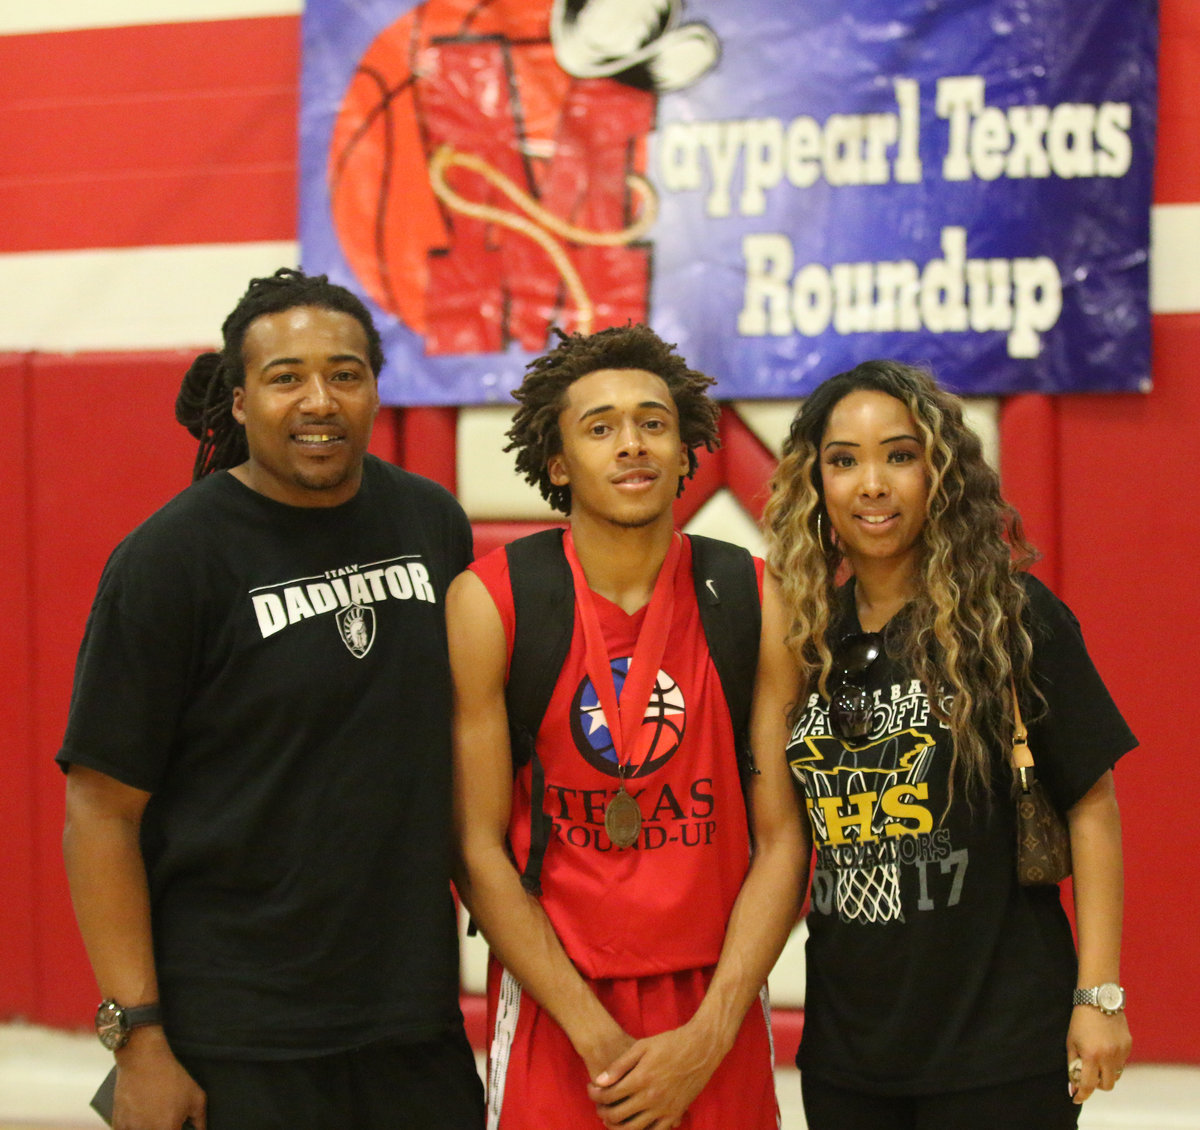 Image: Maypearl Texas Roundup All-Star Keith Davis II, representing Italy Gladiator Basketball, with his parents Keith Davis and Candy Lincoln after the 16th Annual Maypearl Texas Roundup All-Star games hosted by the Maypearl Chamber of Commerce.